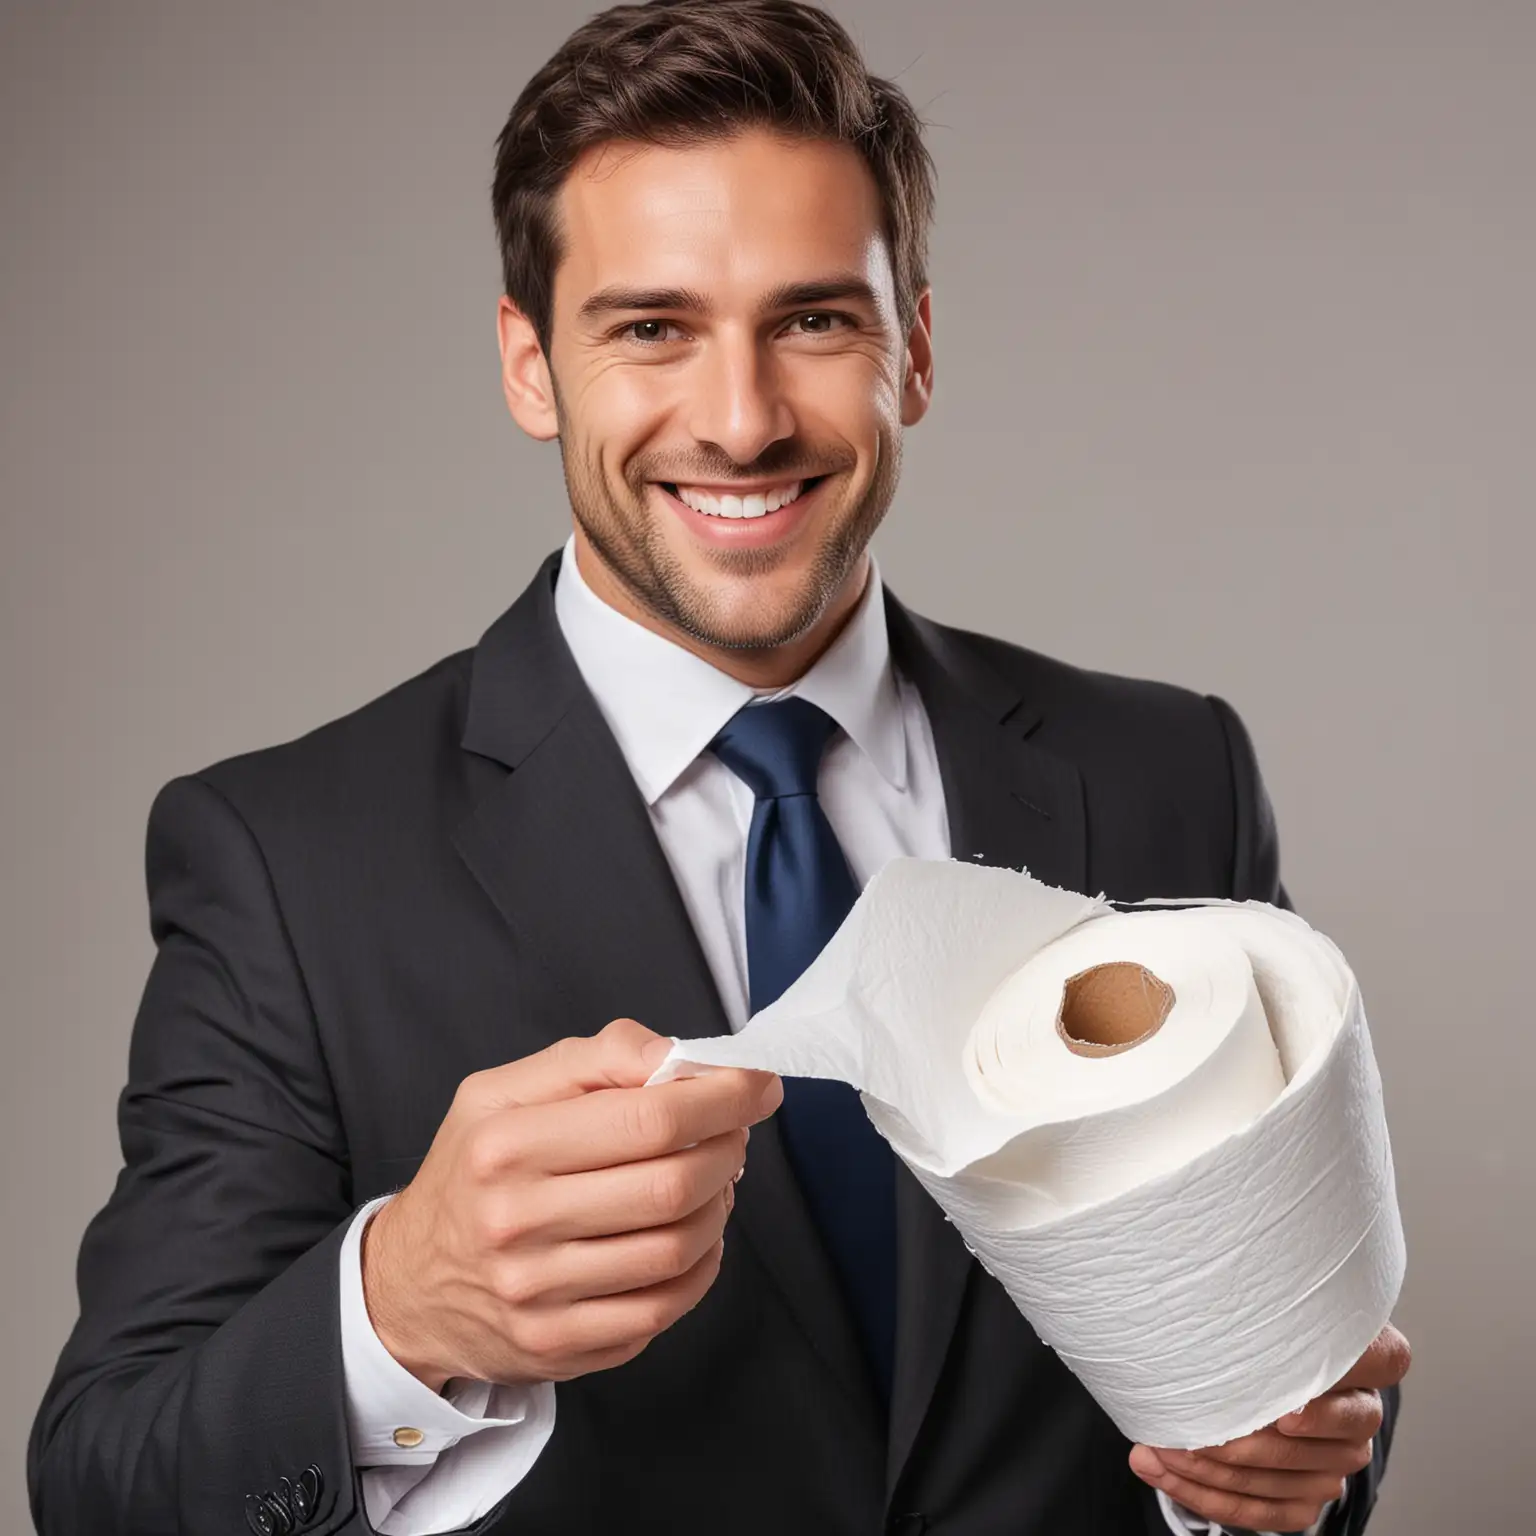 close up  of a smiling man in a business suit holding a roll of toilet paper looking at us